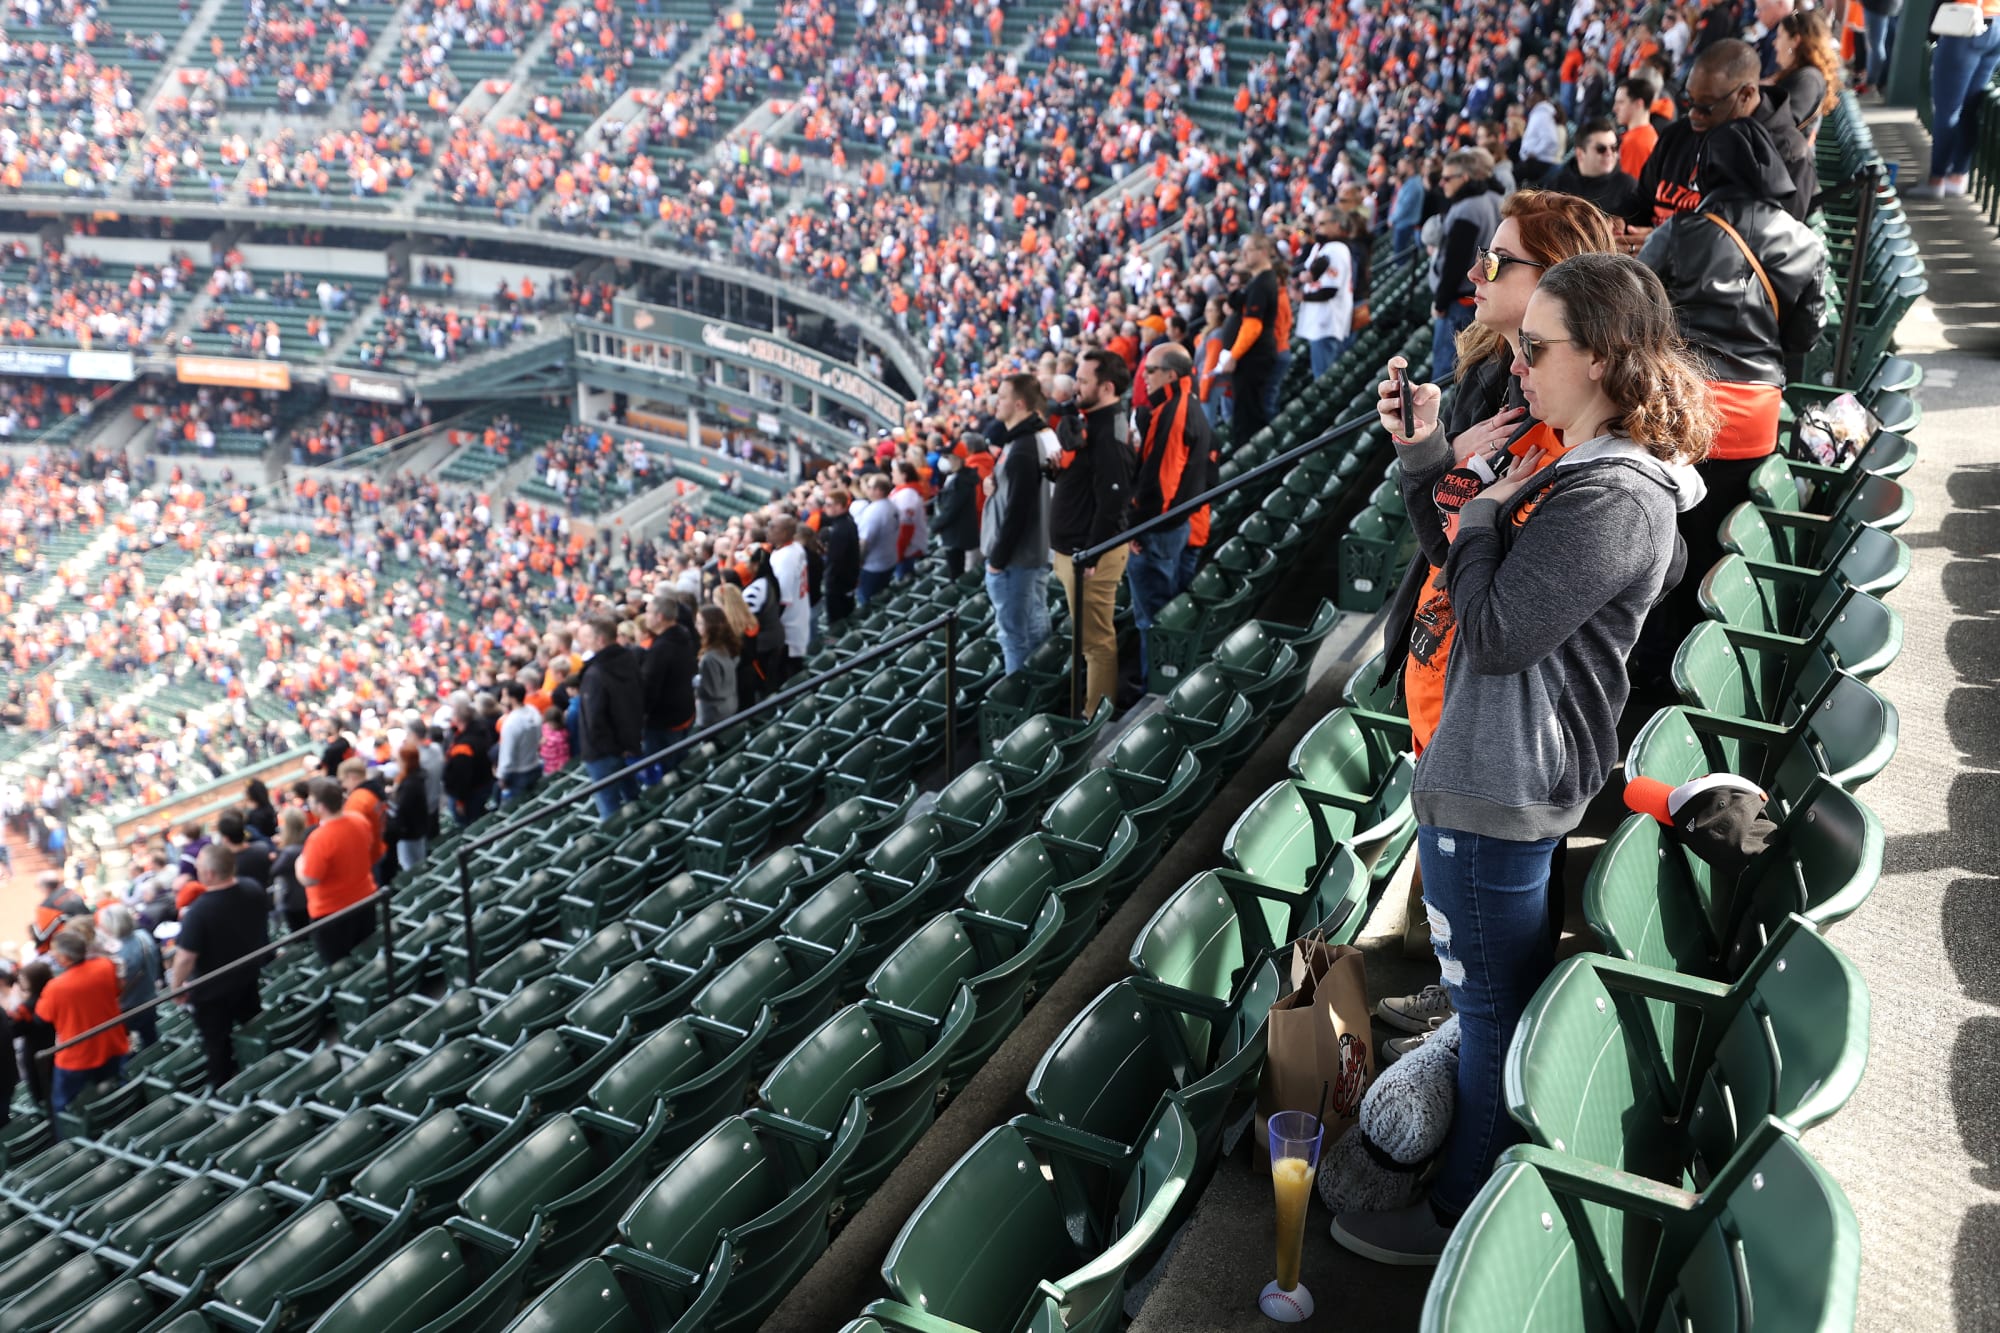 Orioles attendance has surprisingly bounced back in 2022